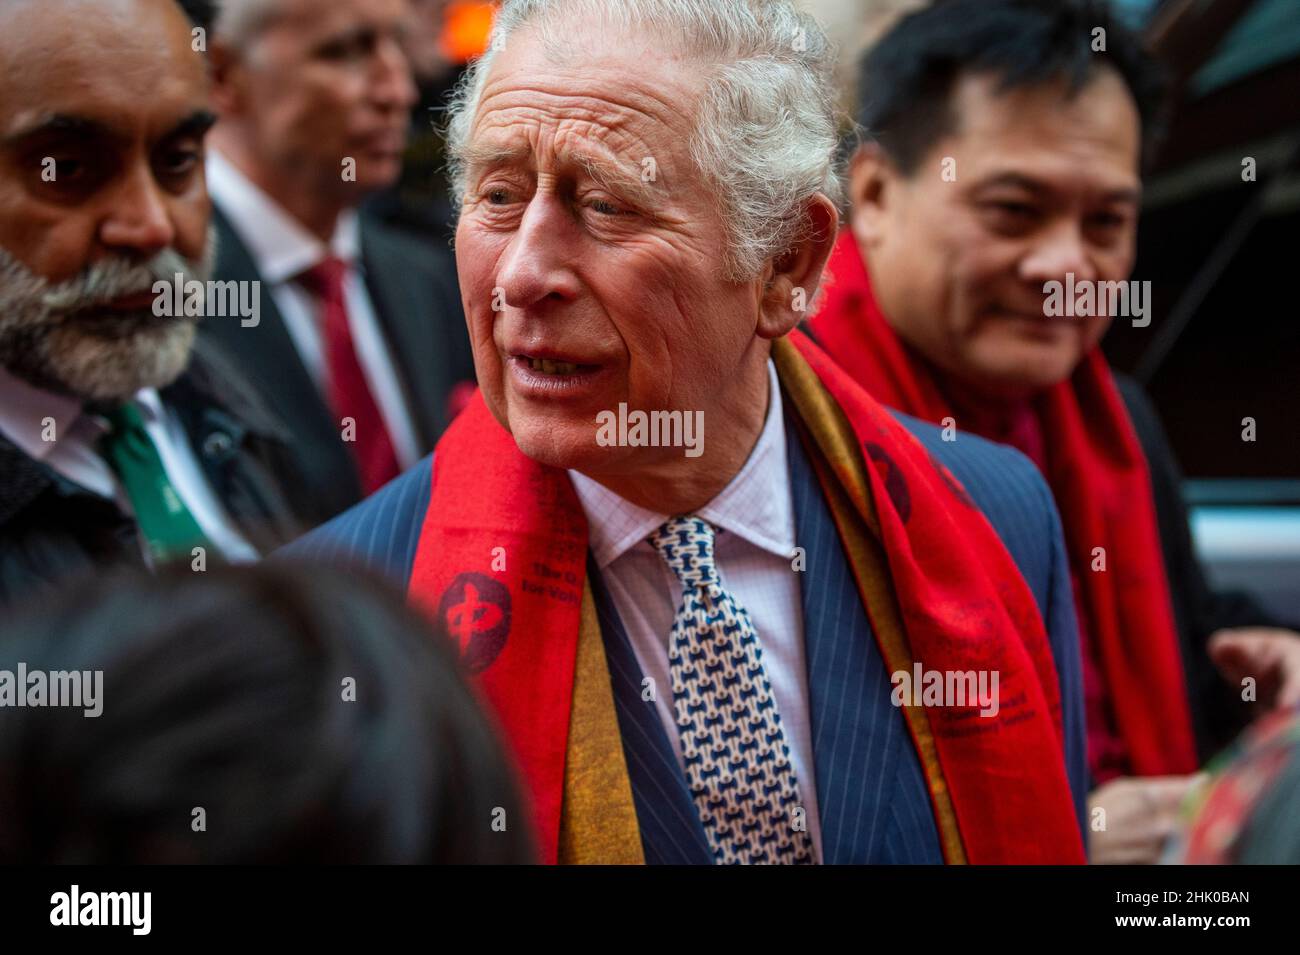 London, UK.  1 February 2022. The Prince of Wales meets crowds in Chinatown during a visit to celebrate the Lunar New Year, the Year of the Tiger.  Credit: Stephen Chung / Alamy Live News Stock Photo